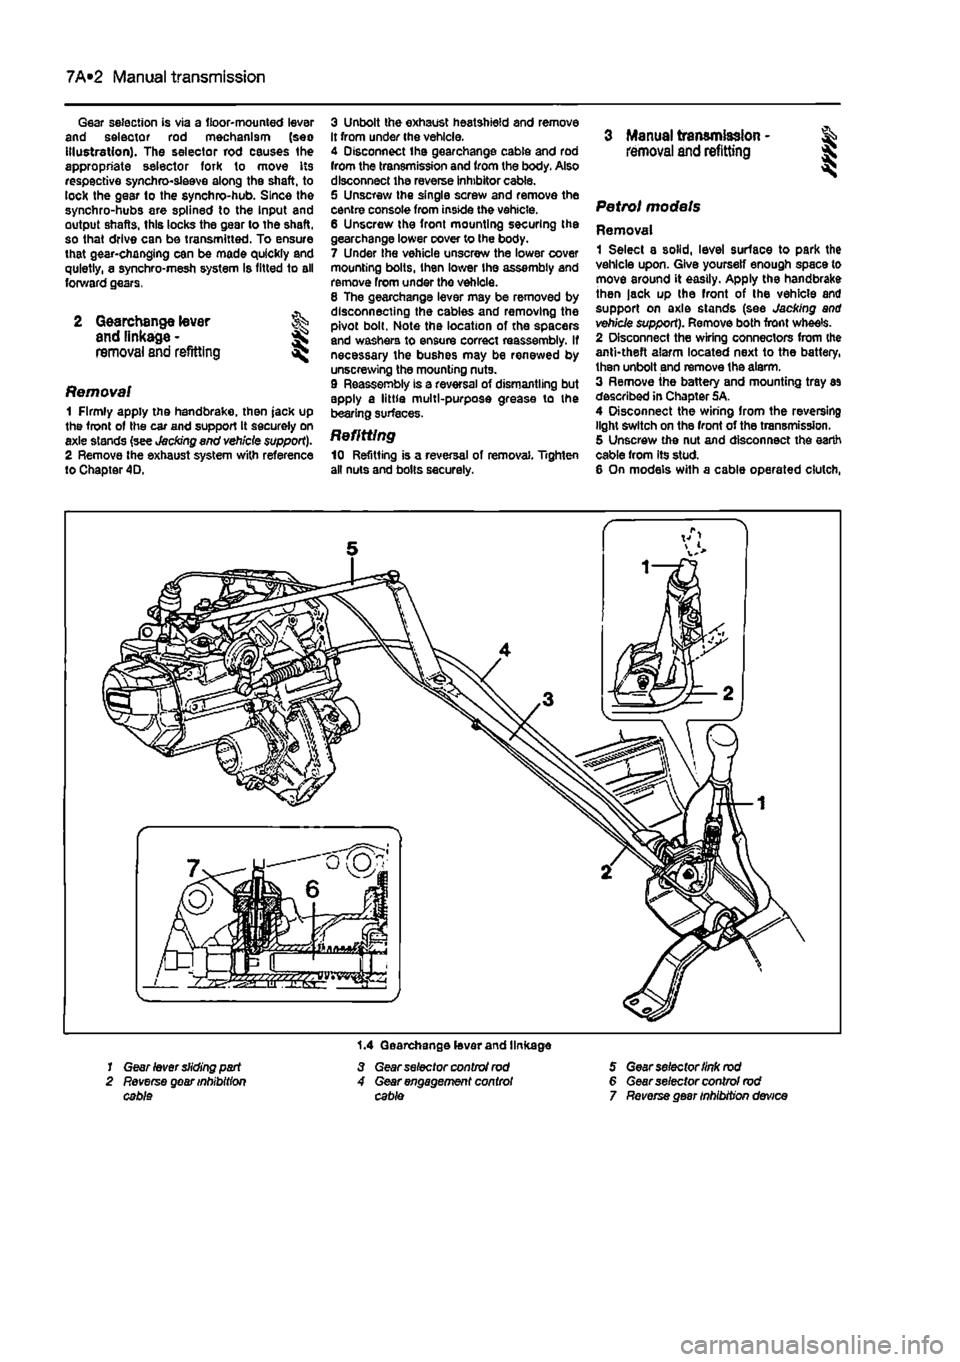 FIAT PUNTO 1999 176 / 1.G Workshop Manual 
7A*2 Manual transmission 
Gear selection is via a floor-mounted lever and selector rod mechanism (seo Illustration). The selector rod causes the appropriate selector fork to move its respective synch